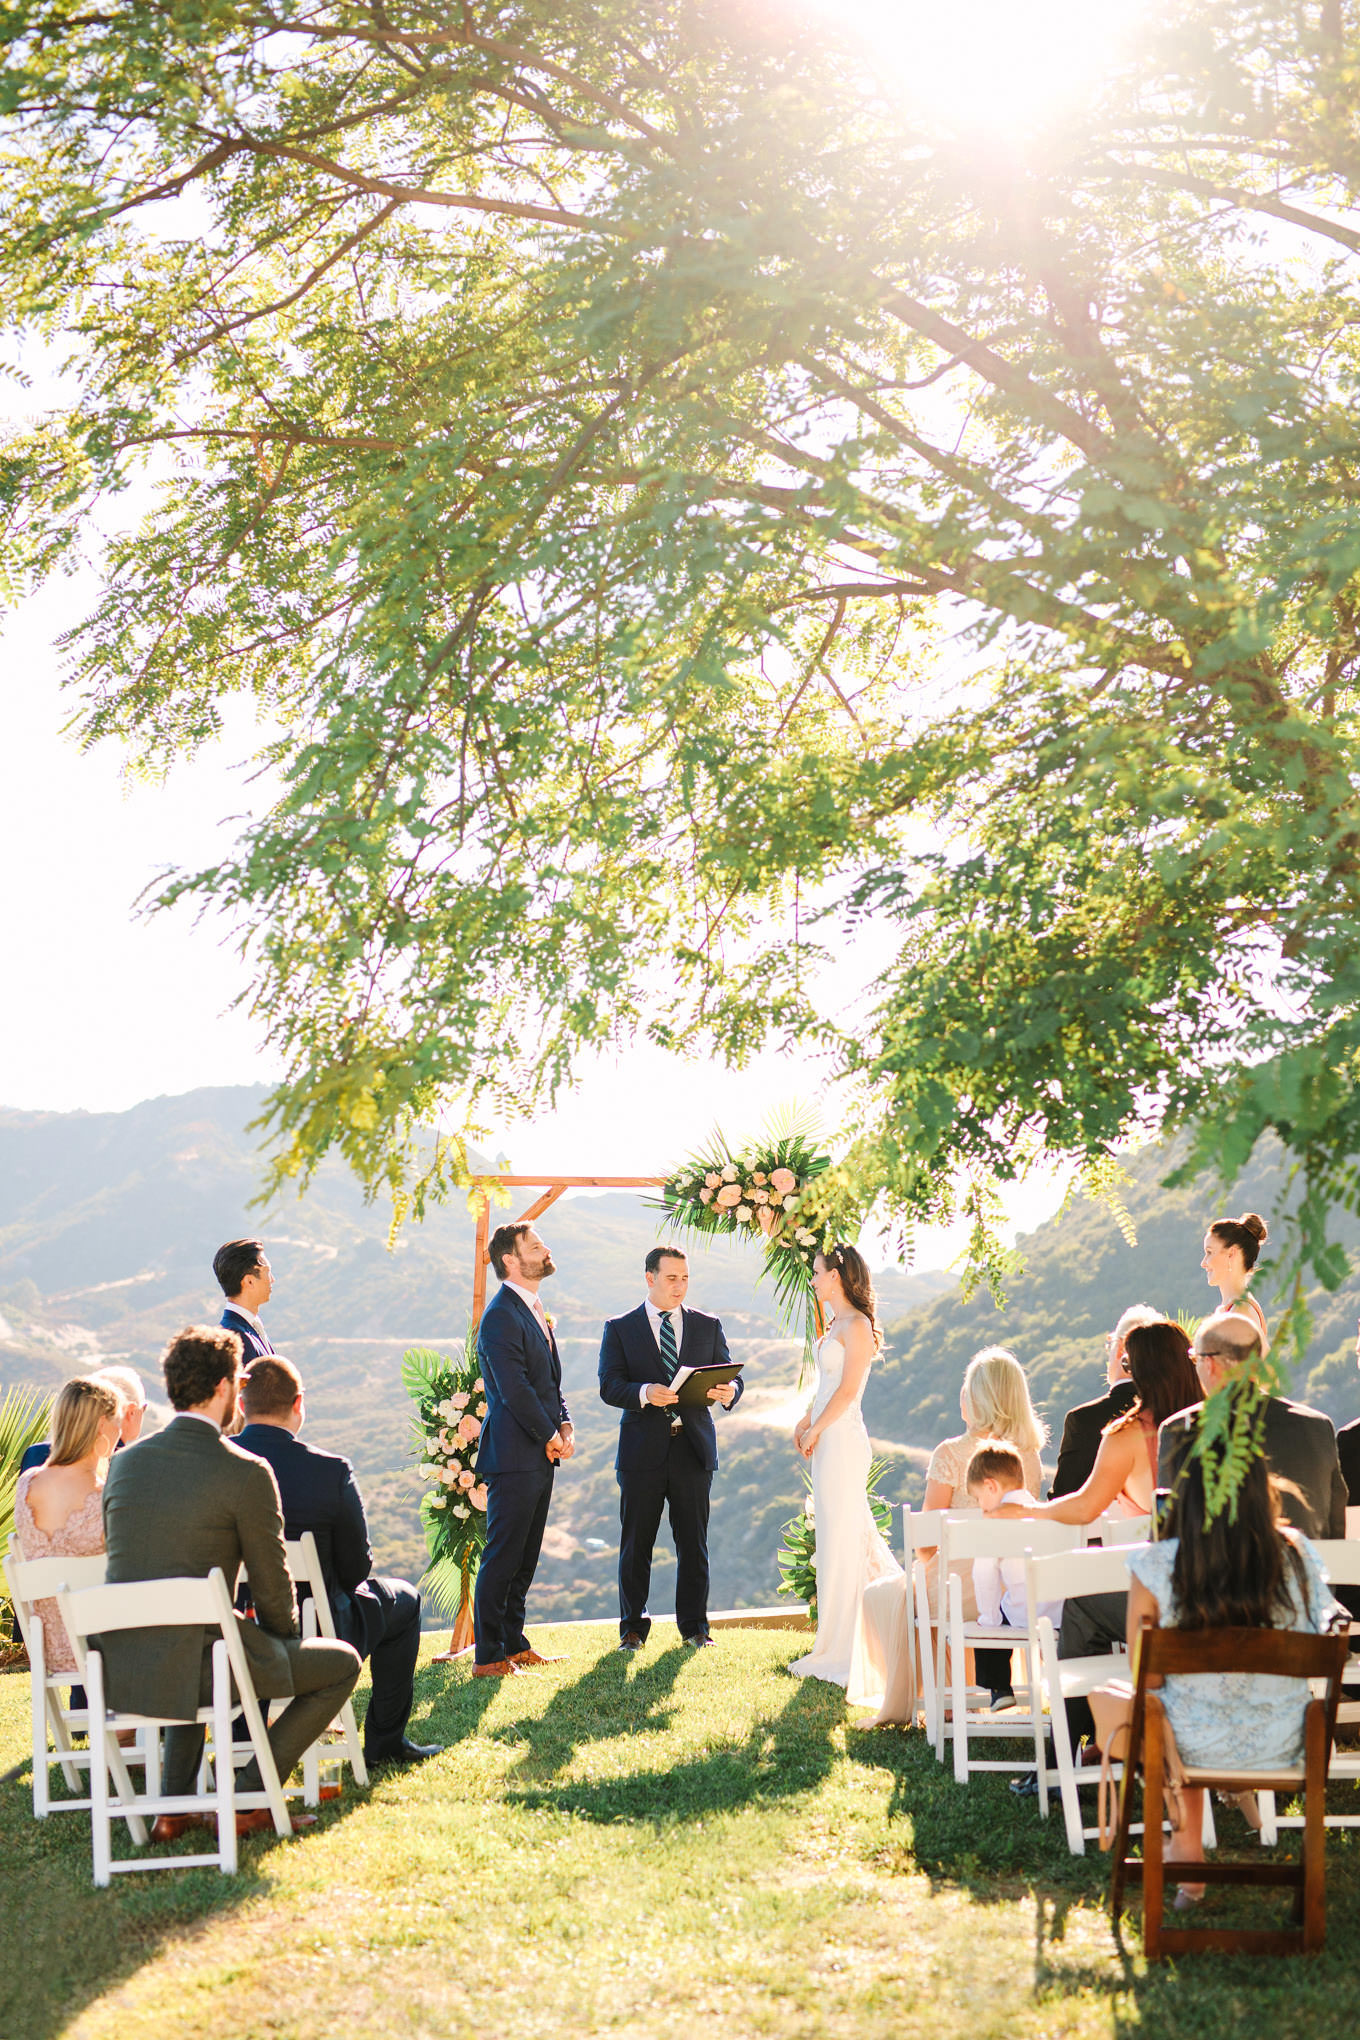 Sunny ceremony at Topanga micro wedding | Engagement, elopement, and wedding photography roundup of Mary Costa’s favorite images from 2020 | Colorful and elevated photography for fun-loving couples in Southern California | #2020wedding #elopement #weddingphoto #weddingphotography #microwedding   Source: Mary Costa Photography | Los Angeles